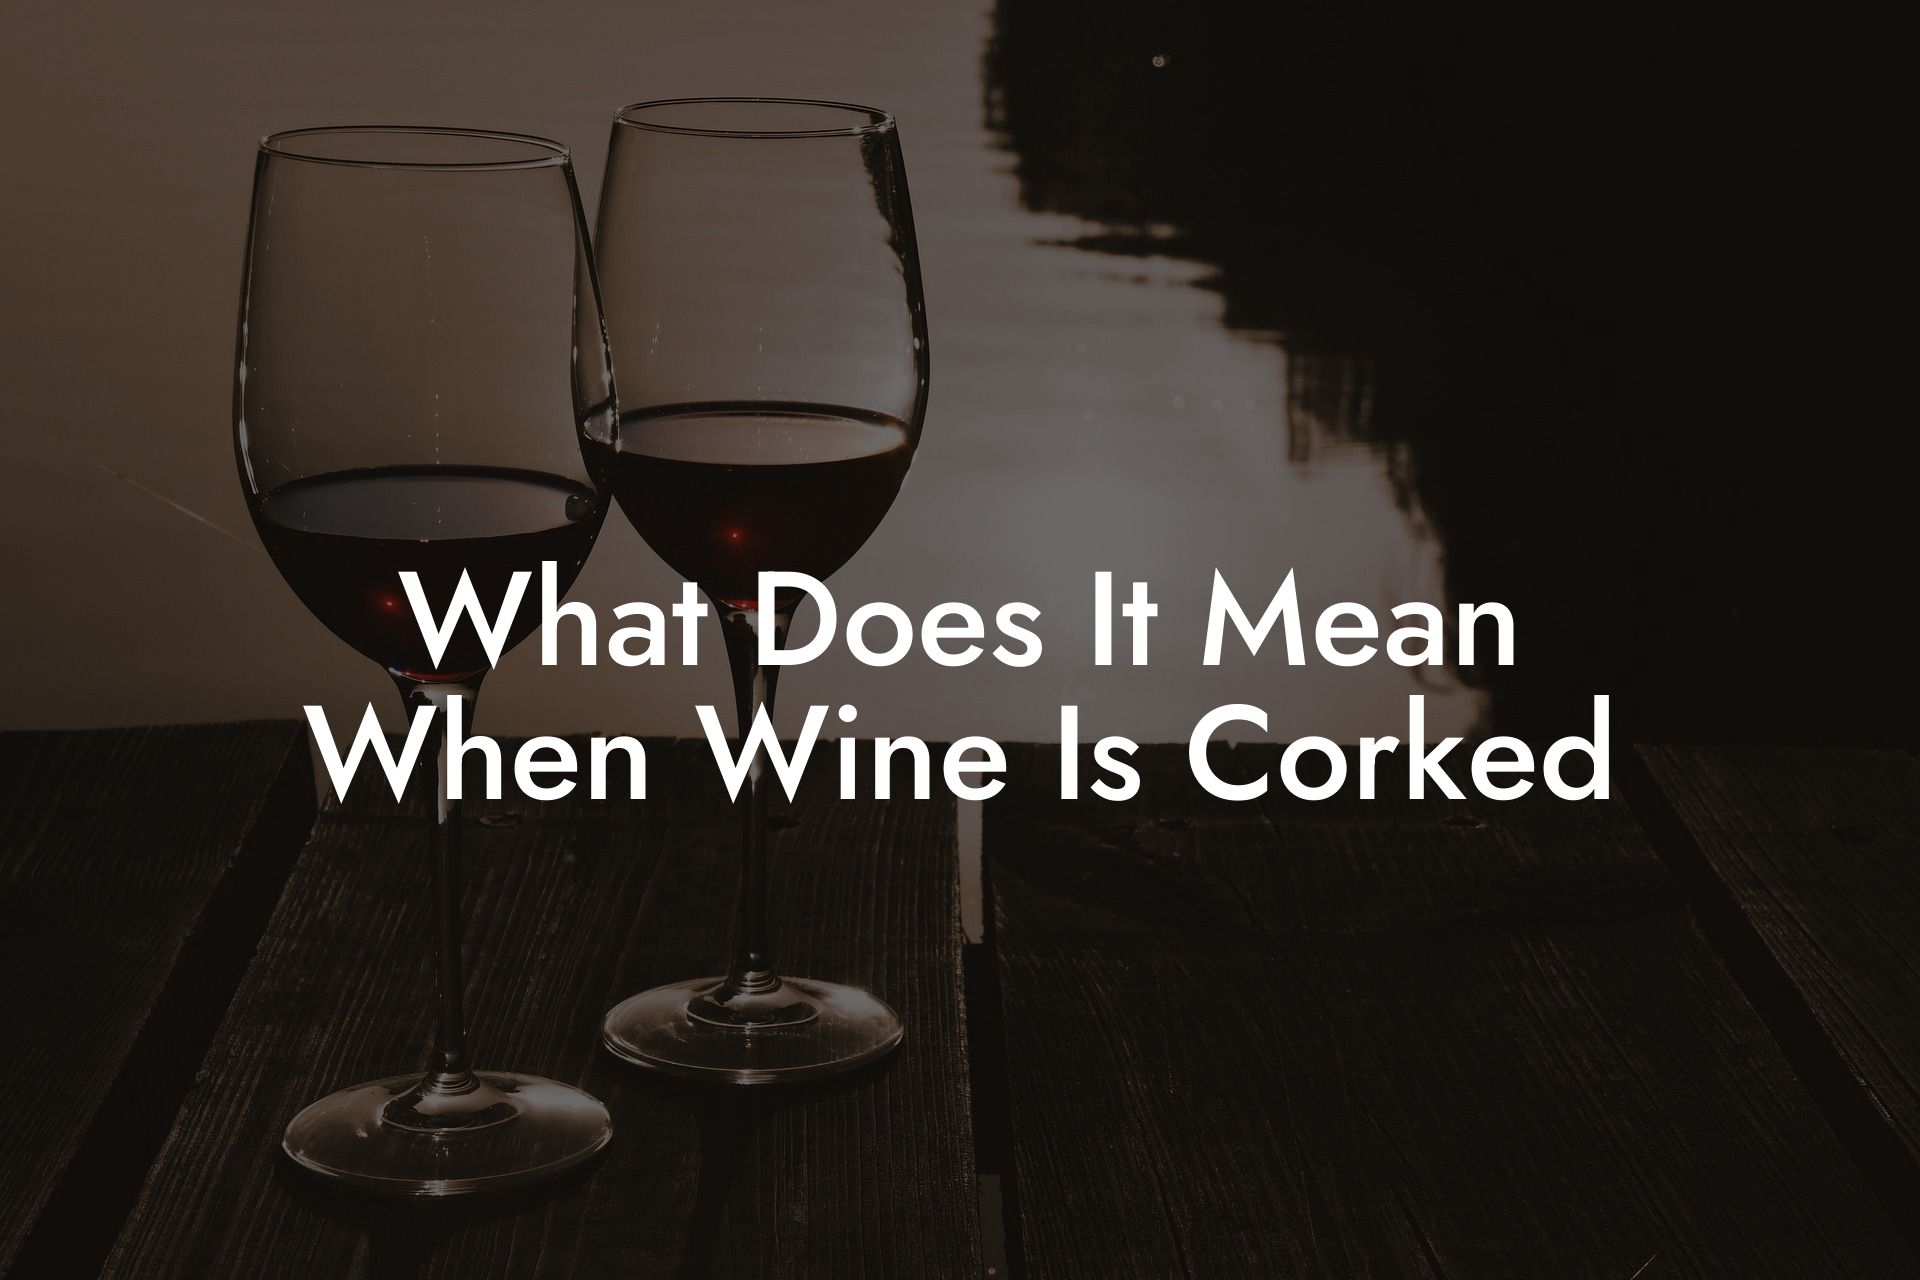 What Does It Mean When Wine Is Corked